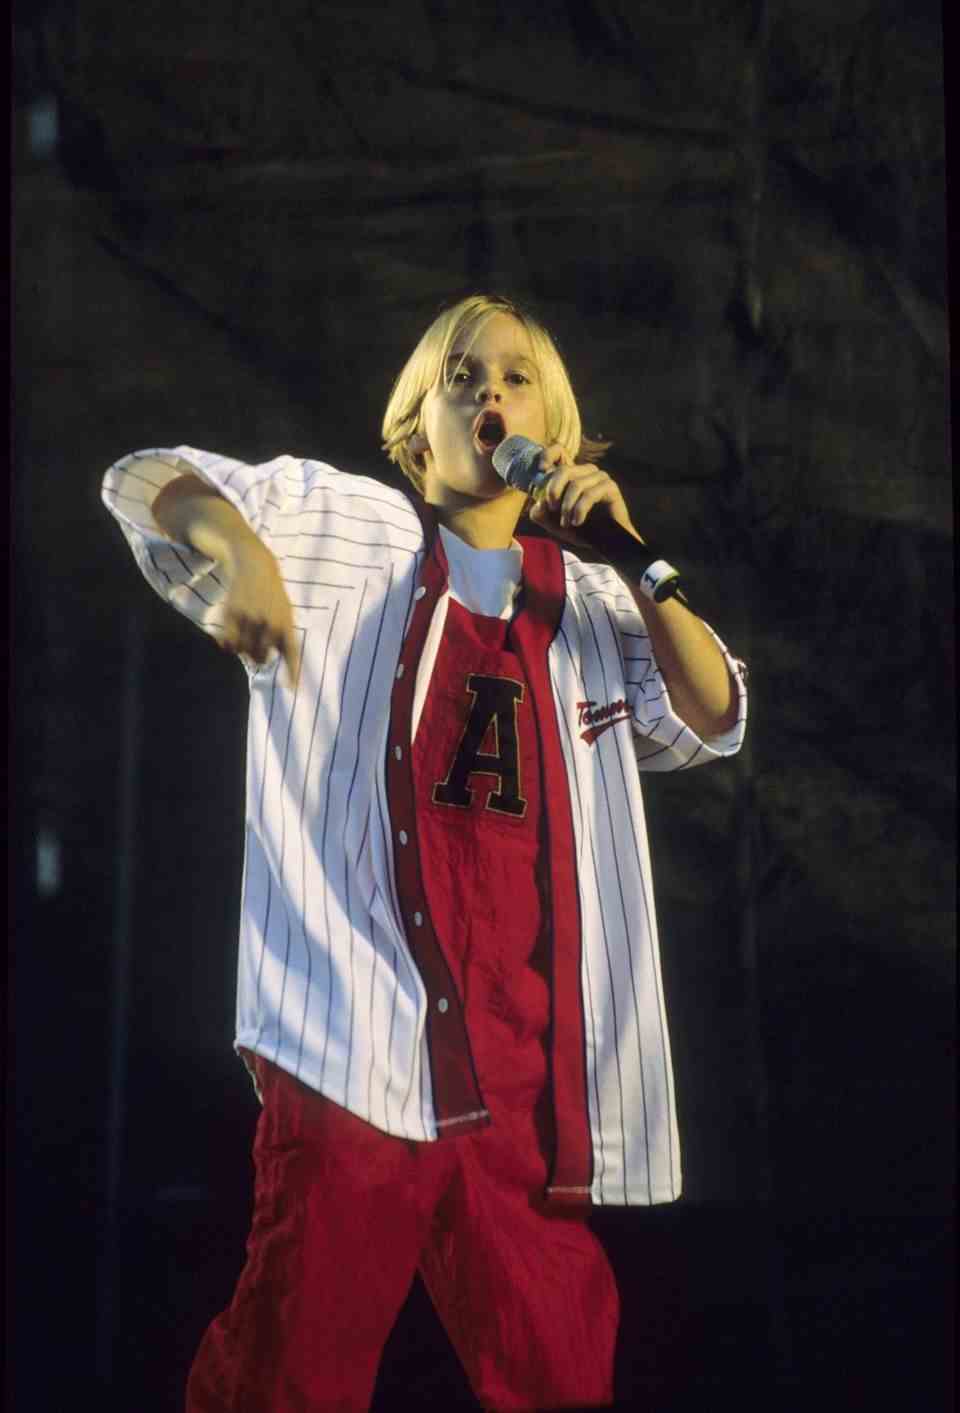 Aaron Carter on stage in 1997